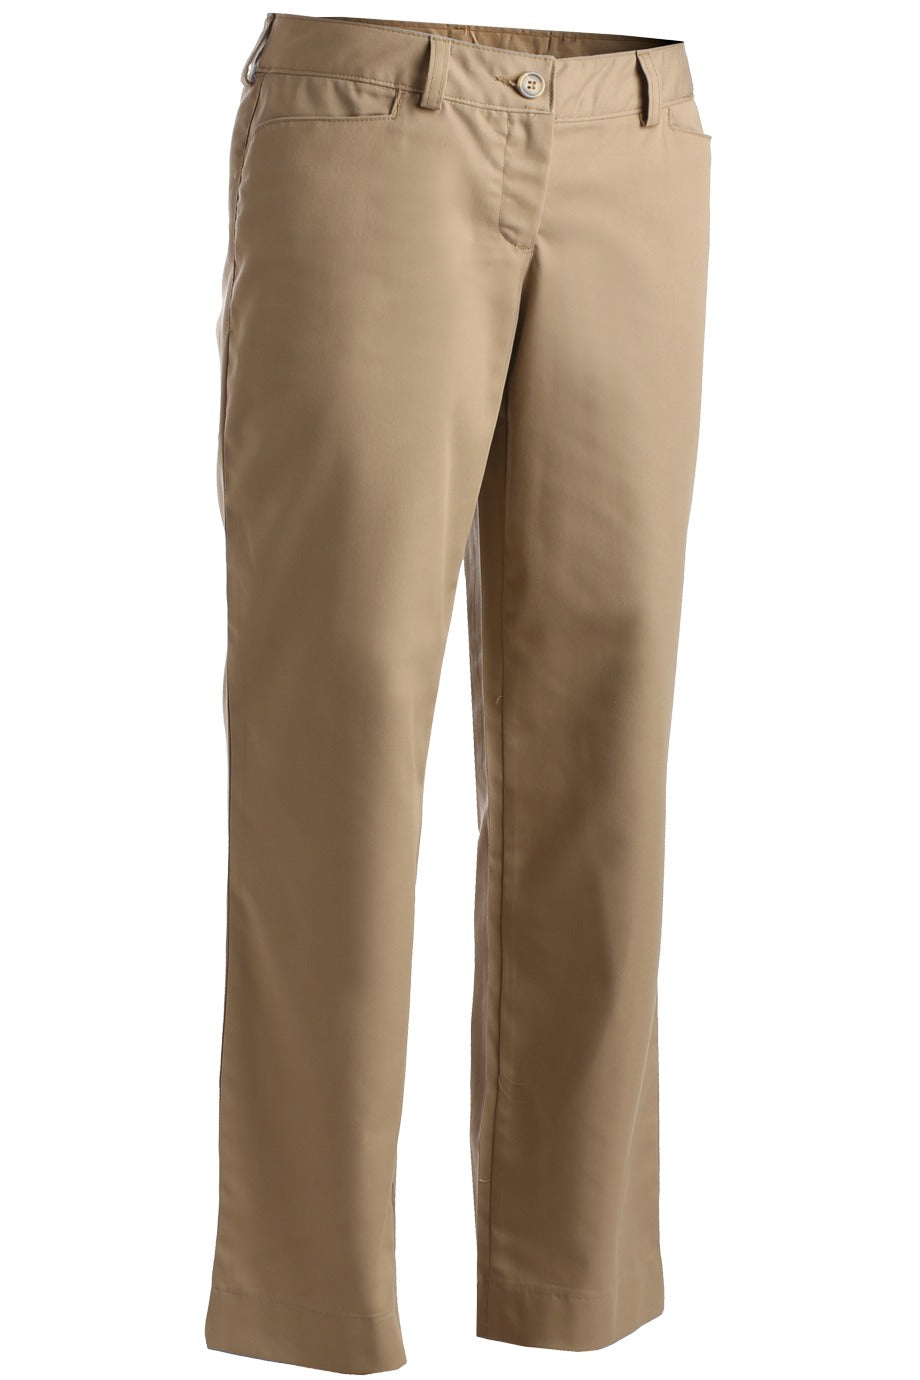 Ryegrass Womens Mid Rise Flare Flat Front Pant | CoolSprings Galleria